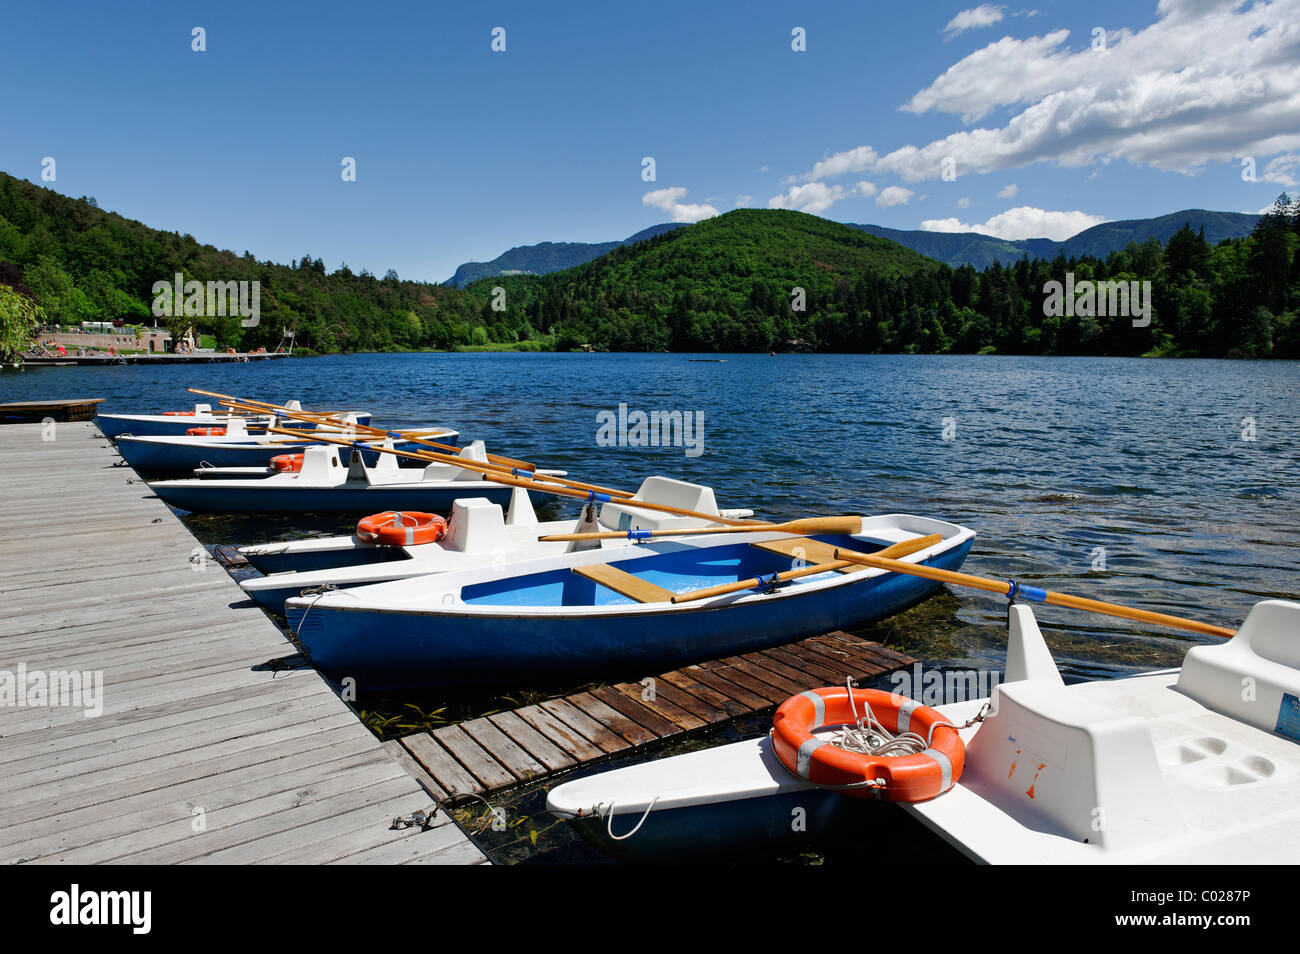 Rental boat station at the lido, Montiggler See lake, at the Weinstrasse, Ueberetsch, Southern Tyrol, Italy, Europe Stock Photo